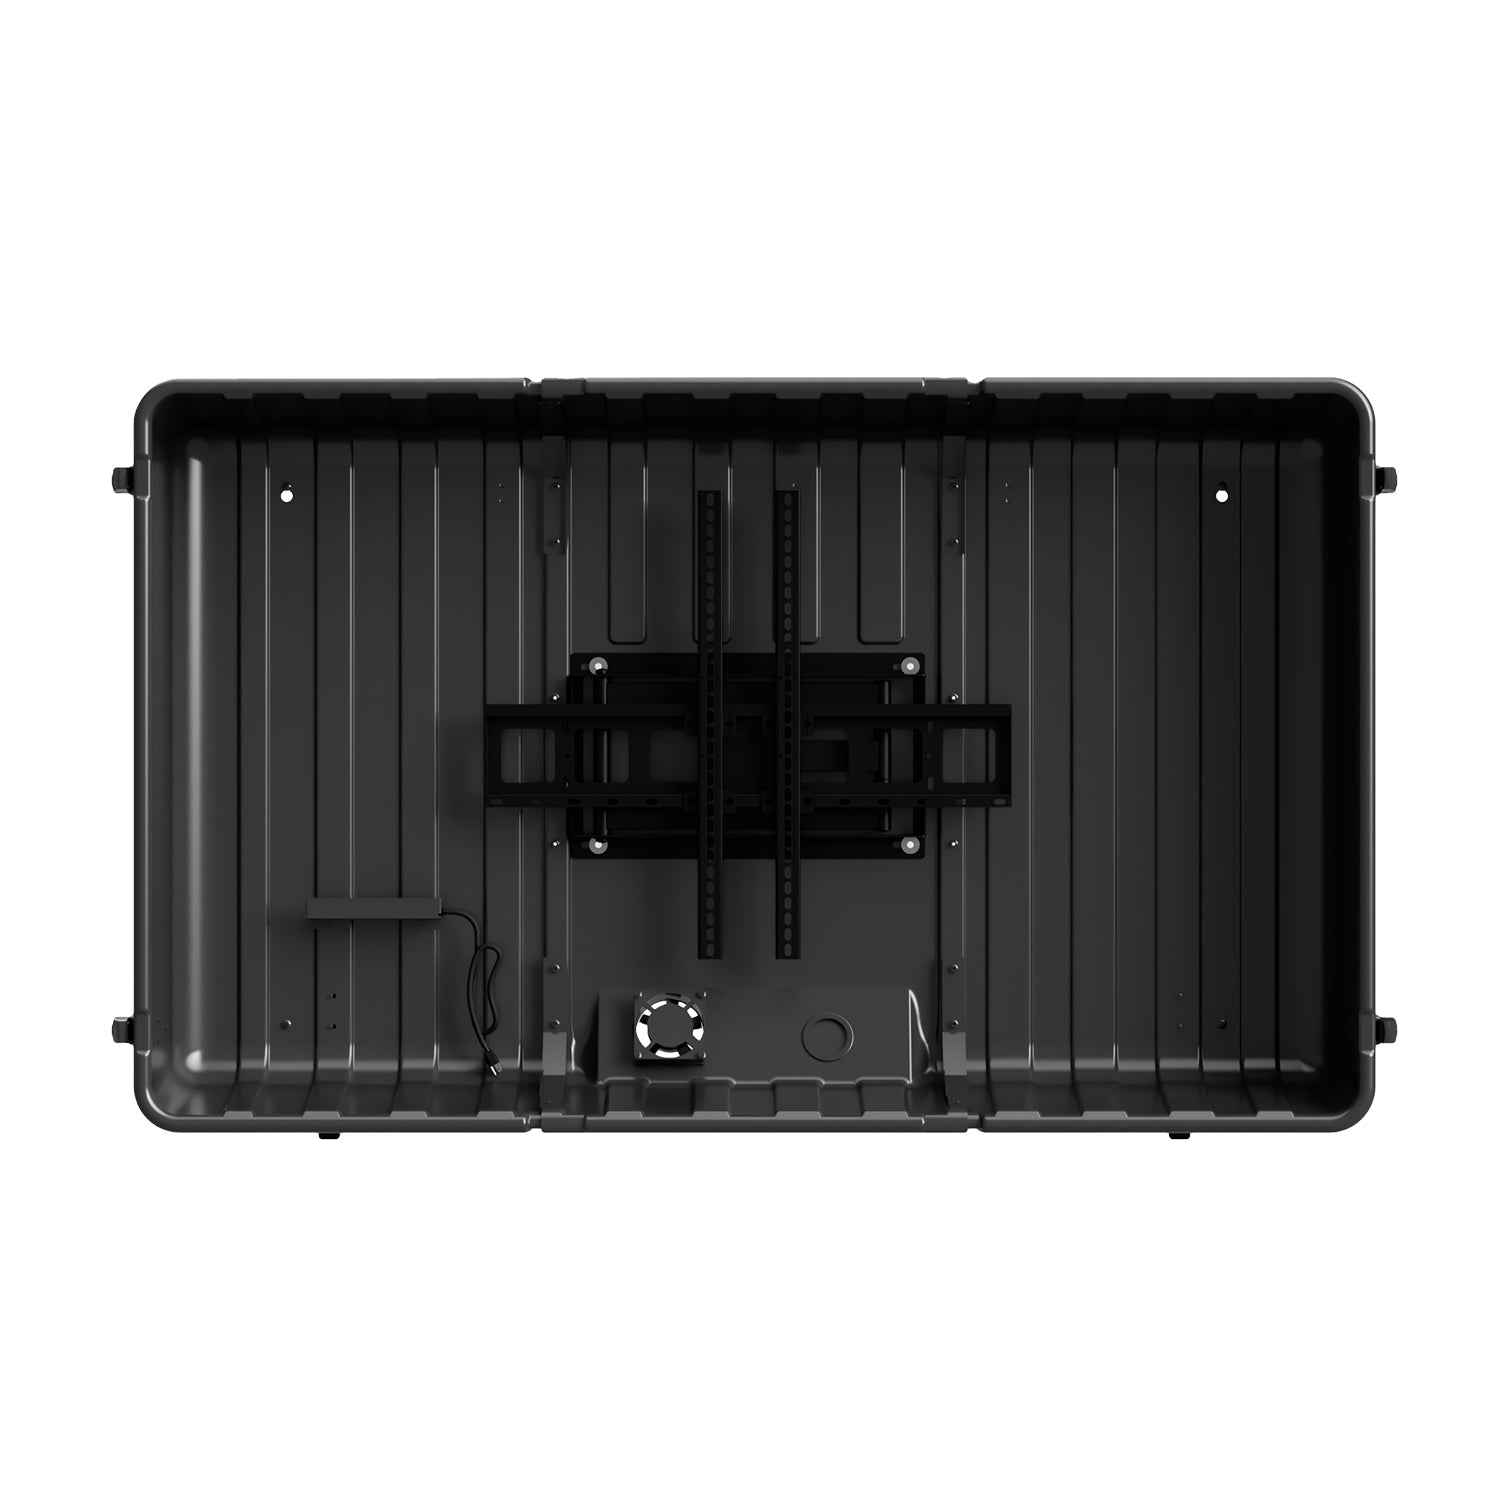 Storm Shell Deluxe Weatherproof 65” Outdoor TV Enclosure, Cooling fan and power strip included. Showing  mounting bracket with front cover removed